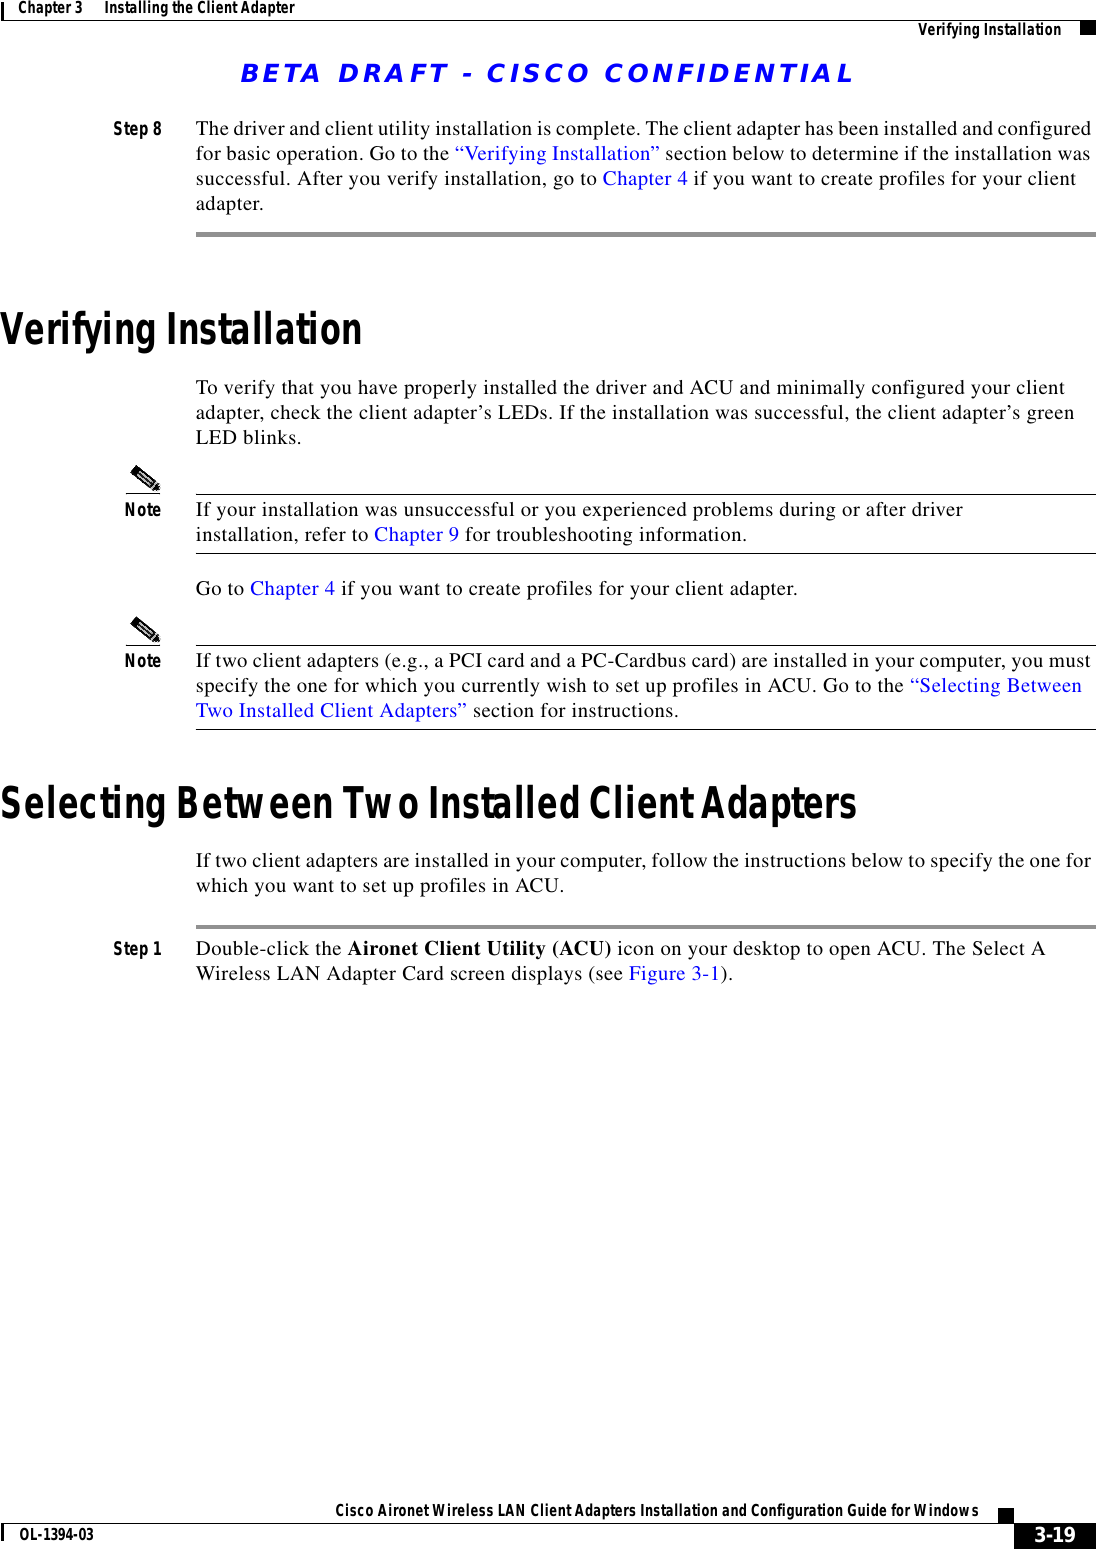 BETA DRAFT - CISCO CONFIDENTIAL3-19Cisco Aironet Wireless LAN Client Adapters Installation and Configuration Guide for WindowsOL-1394-03Chapter 3      Installing the Client Adapter Verifying InstallationStep 8 The driver and client utility installation is complete. The client adapter has been installed and configured for basic operation. Go to the “Verifying Installation” section below to determine if the installation was successful. After you verify installation, go to Chapter 4 if you want to create profiles for your client adapter.Verifying InstallationTo verify that you have properly installed the driver and ACU and minimally configured your client adapter, check the client adapter’s LEDs. If the installation was successful, the client adapter’s green LED blinks.Note If your installation was unsuccessful or you experienced problems during or after driver installation, refer to Chapter 9 for troubleshooting information.Go to Chapter 4 if you want to create profiles for your client adapter.Note If two client adapters (e.g., a PCI card and a PC-Cardbus card) are installed in your computer, you must specify the one for which you currently wish to set up profiles in ACU. Go to the “Selecting Between Two Installed Client Adapters” section for instructions.Selecting Between Two Installed Client AdaptersIf two client adapters are installed in your computer, follow the instructions below to specify the one for which you want to set up profiles in ACU.Step 1 Double-click the Aironet Client Utility (ACU) icon on your desktop to open ACU. The Select A Wireless LAN Adapter Card screen displays (see Figure 3-1).